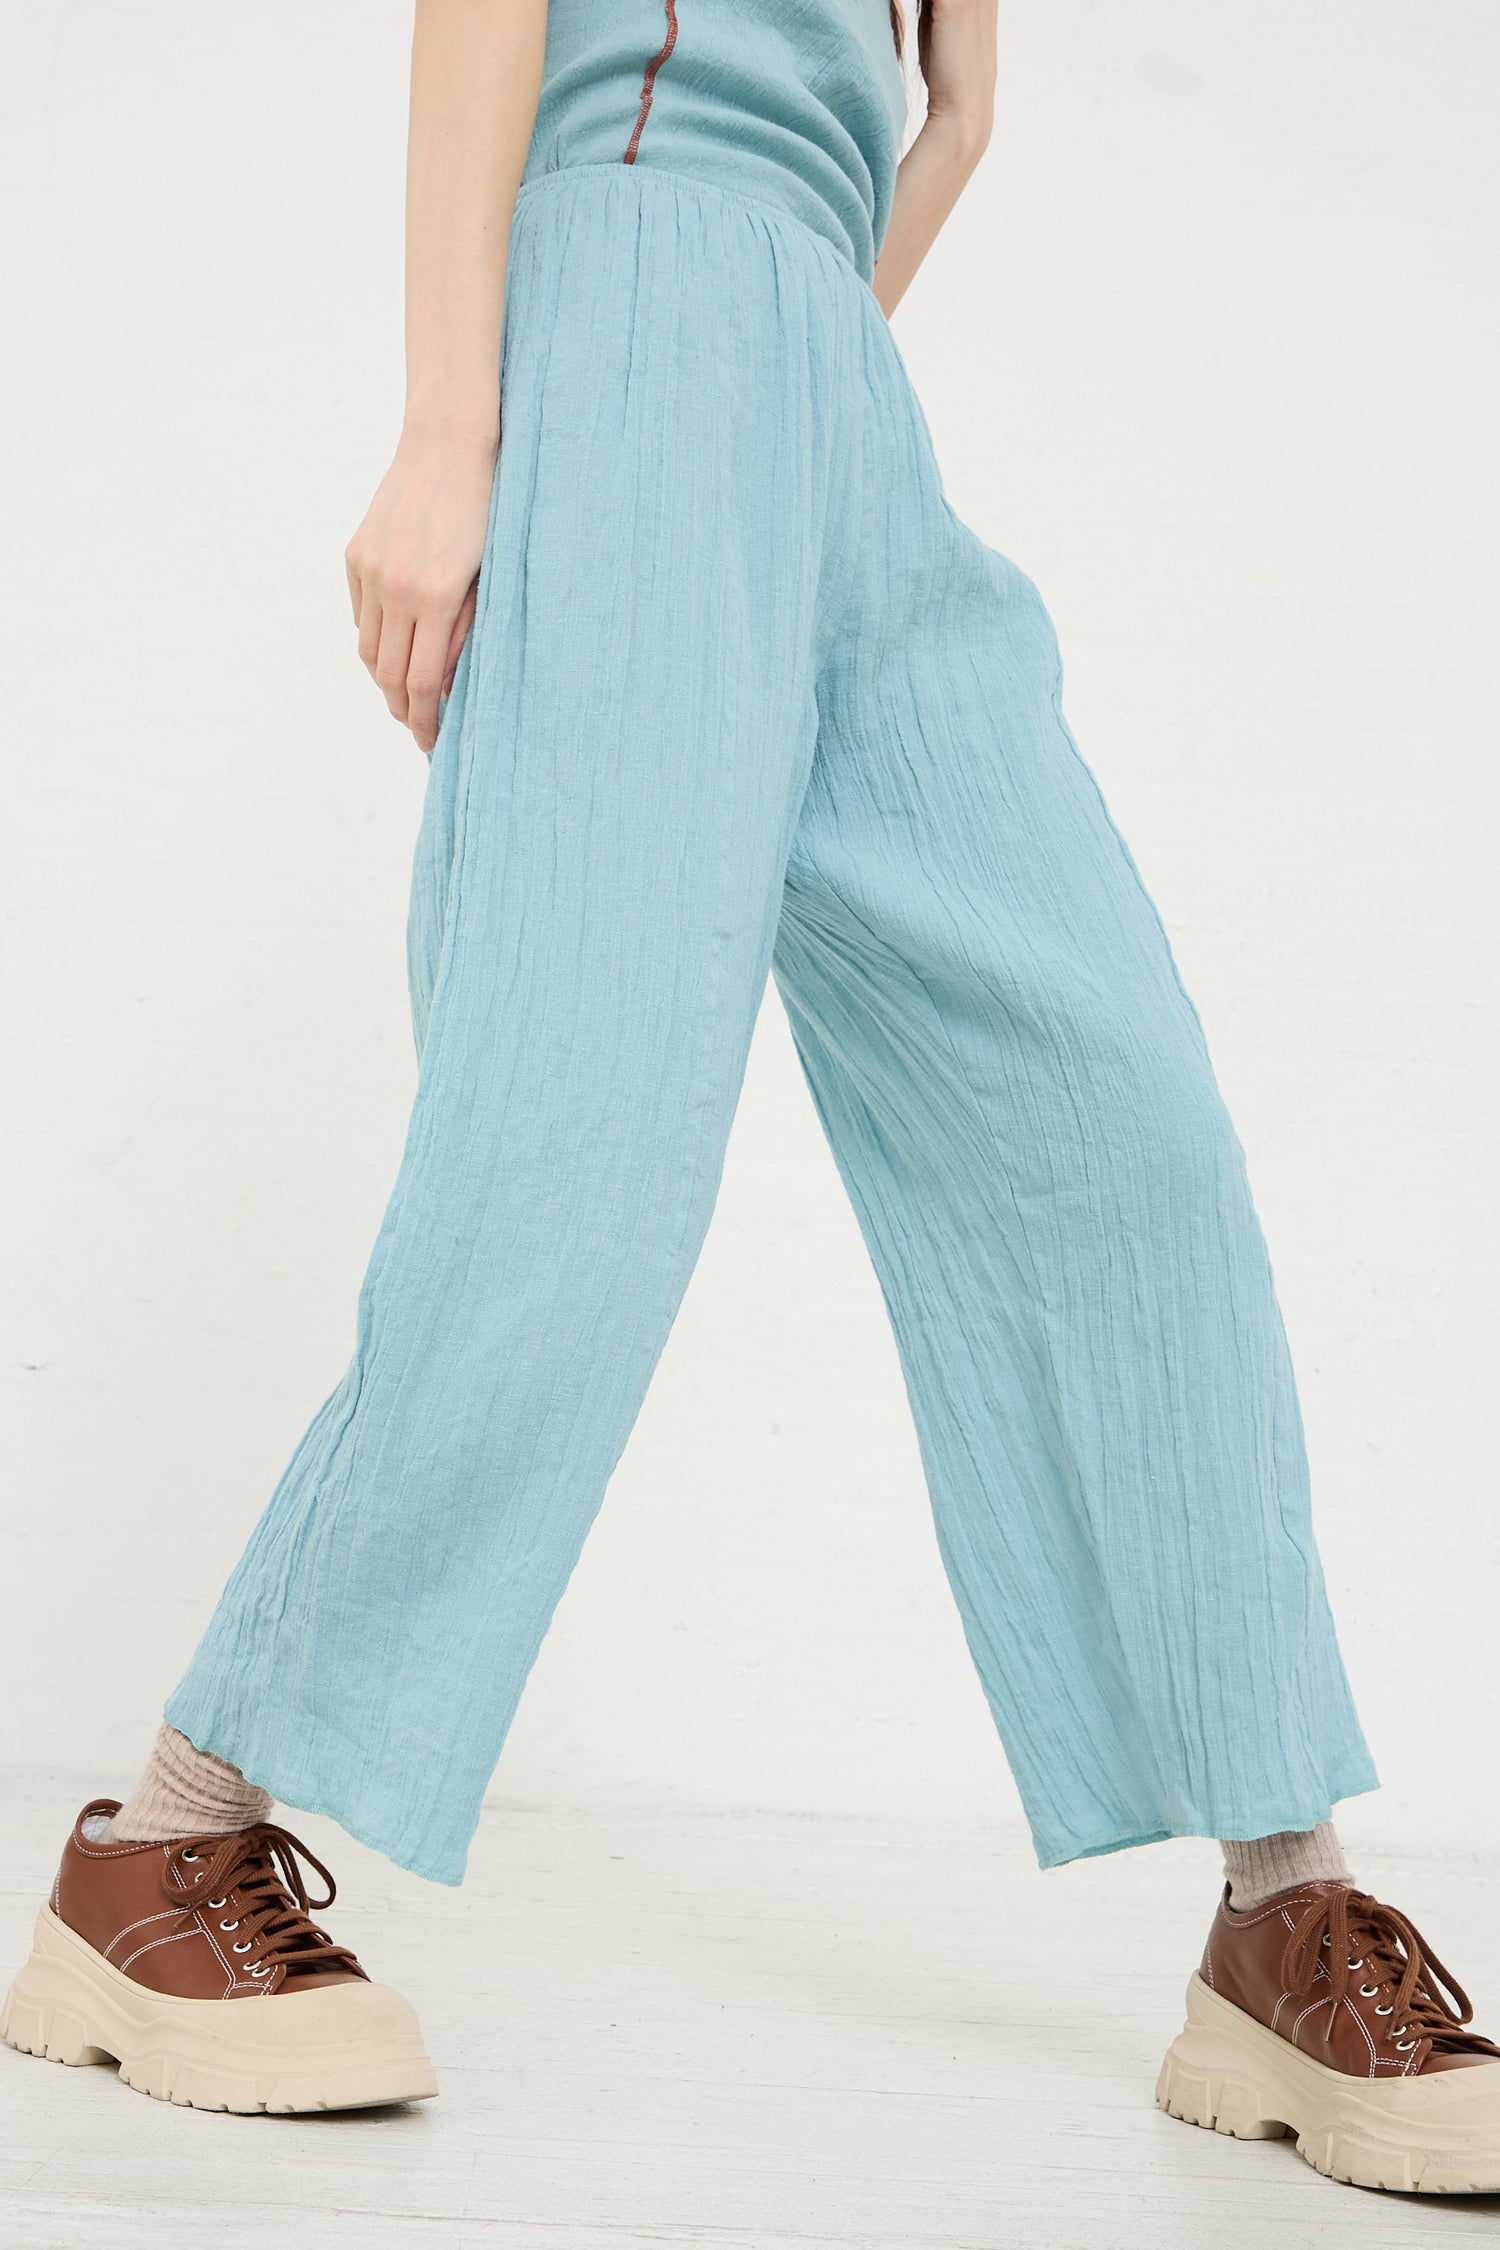 A person standing in a light blue pair of Crinkle Linen Cotton Shok Pants in Wuxi Blue by Baserange and brown lace-up shoes.